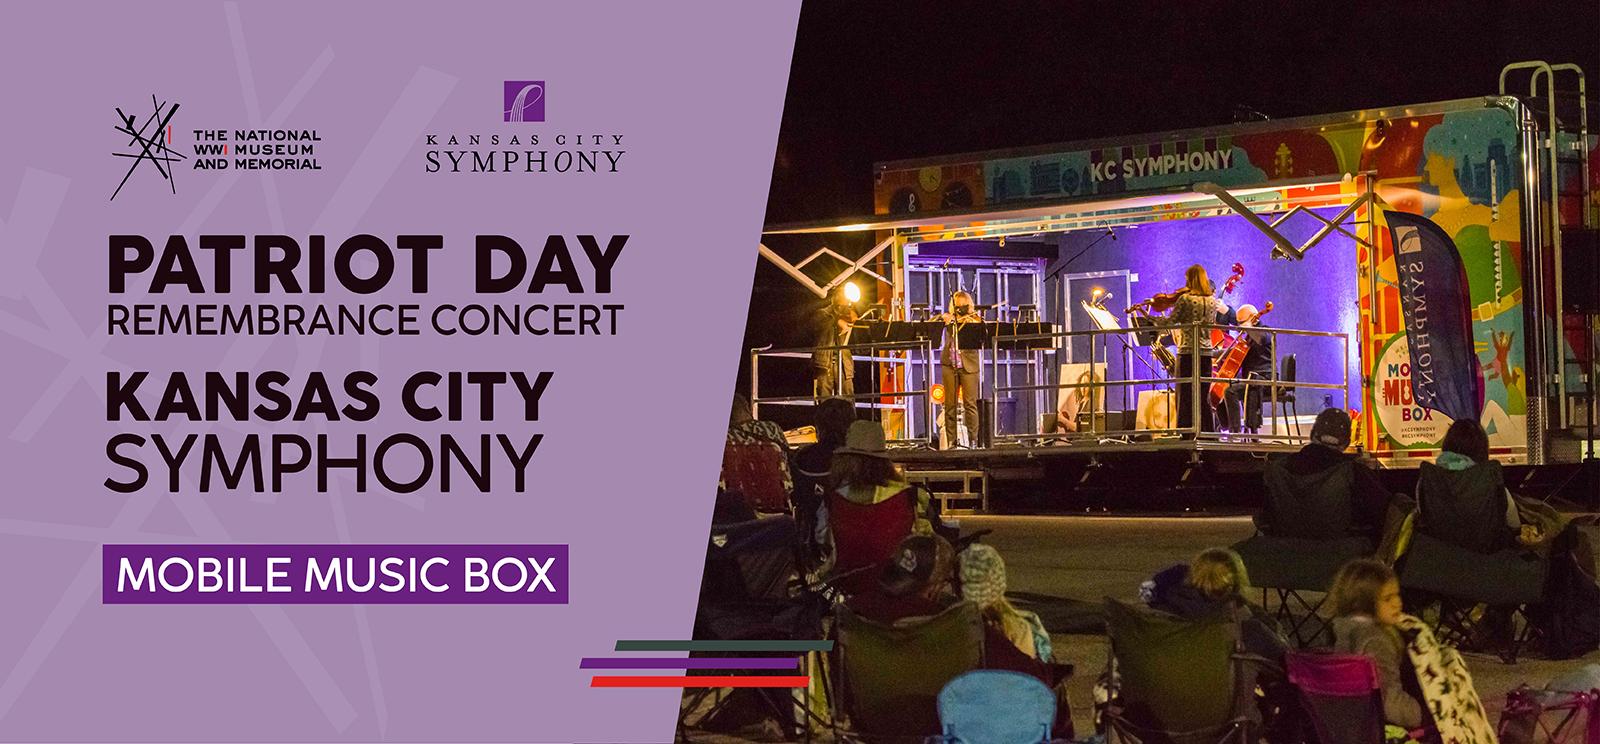 Image: Modern photograph of a portable stage on wheels, lit up at night, with several musicians playing cellos and violins on the stage. Text: Patriot Day Remembrance Concert / Kansas City Symphony / Mobile Music Box